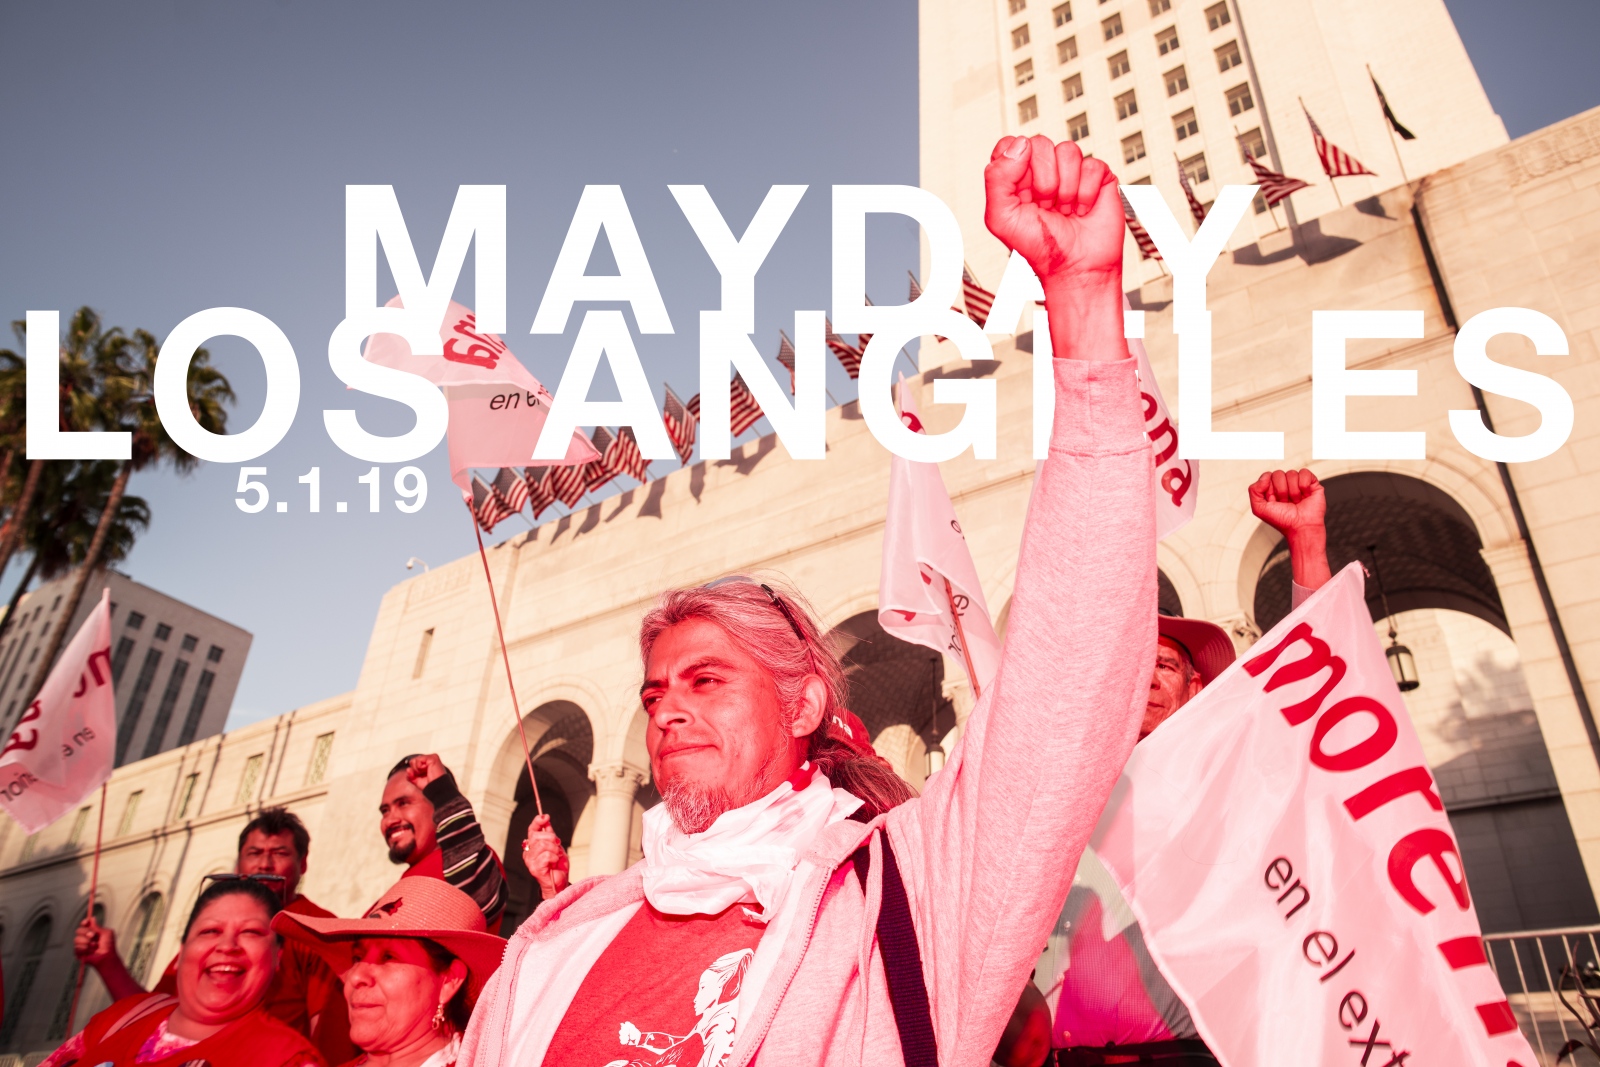 MAYDAY March in Los Angeles